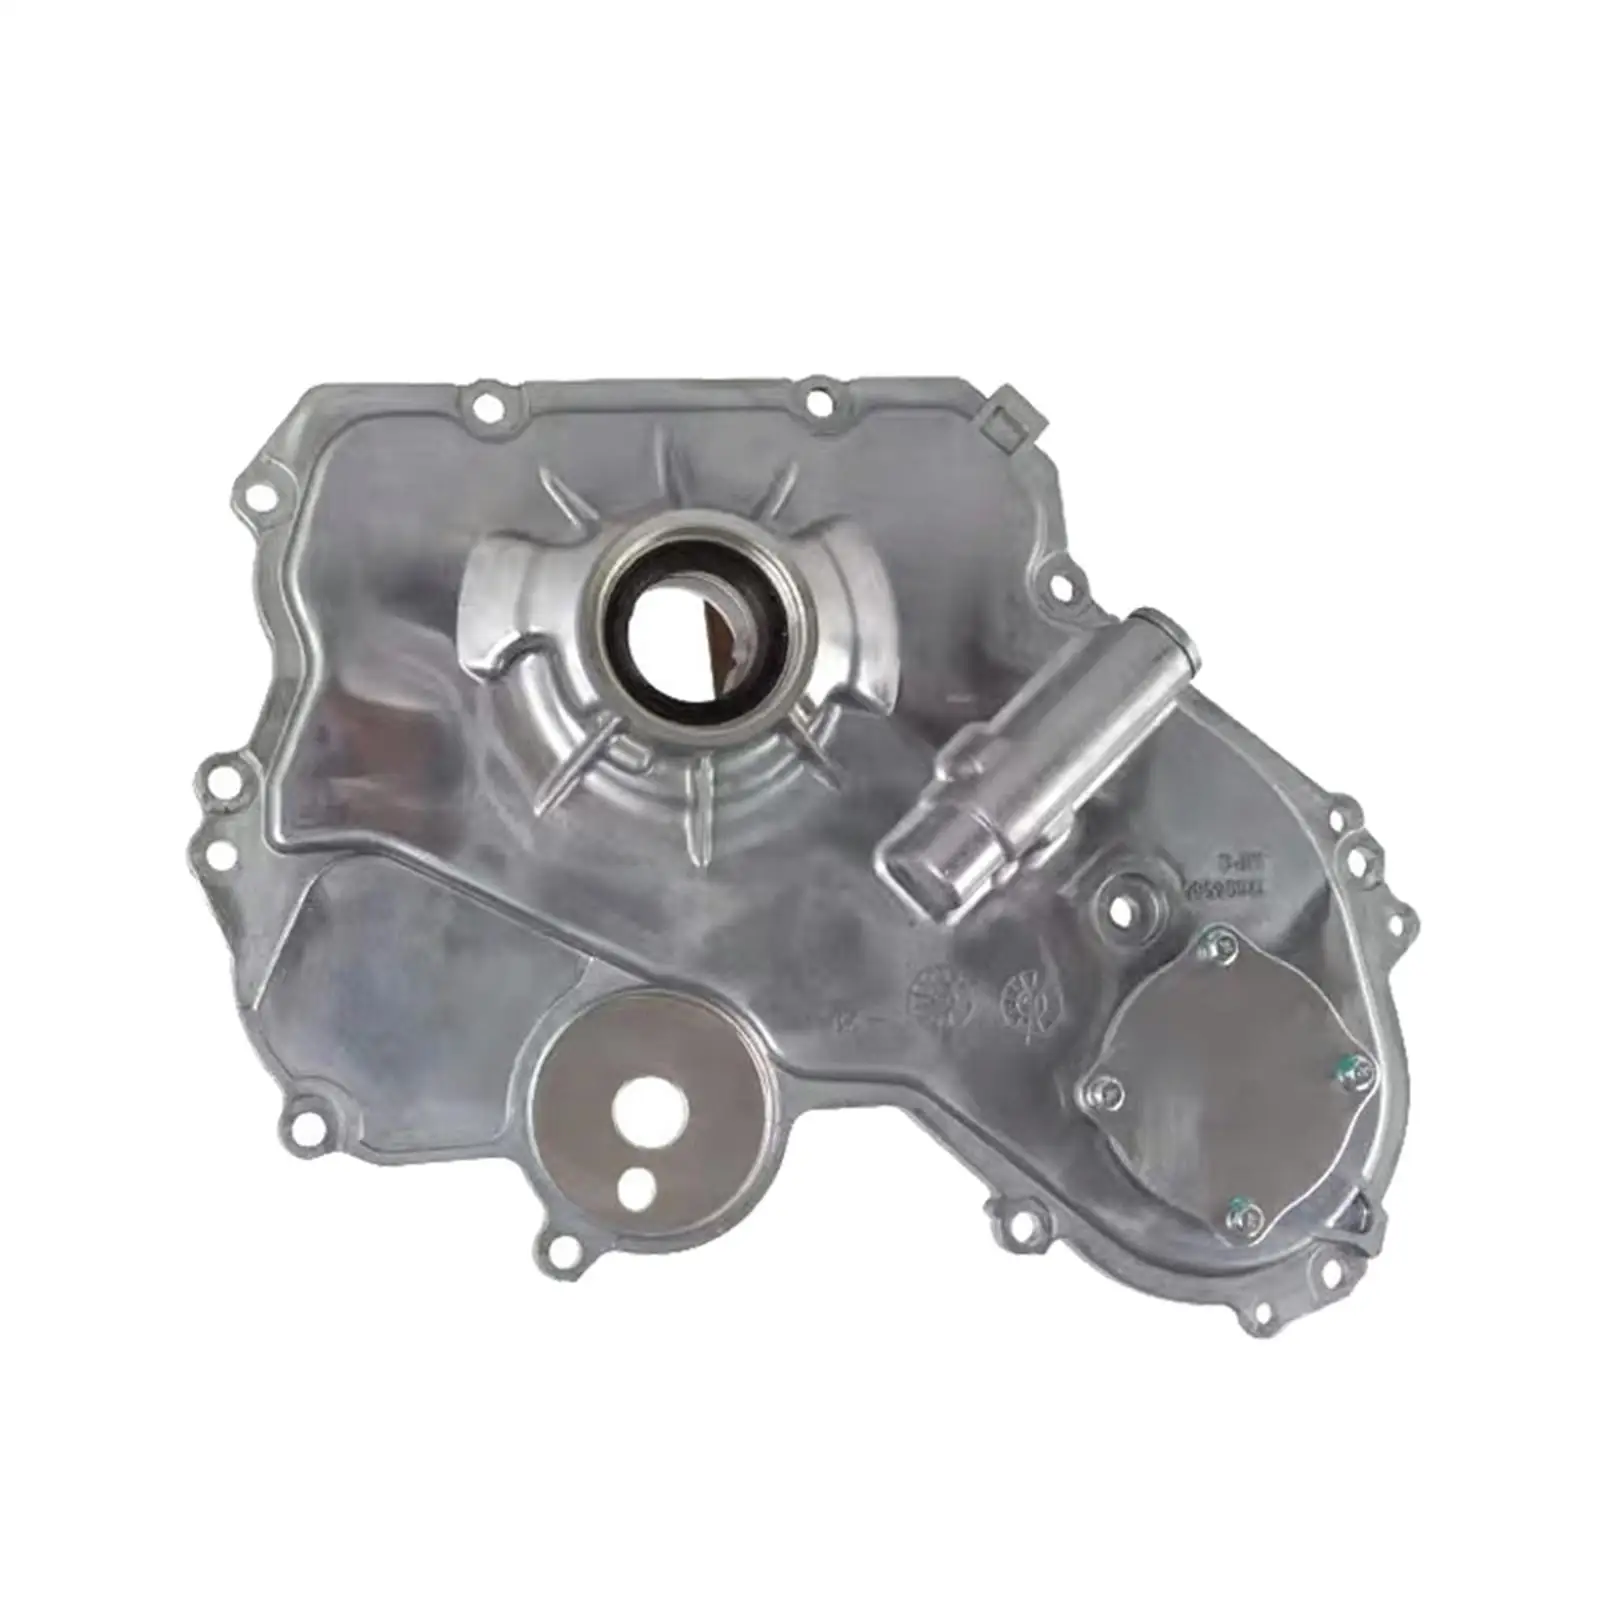 Engine Oil Pump Replacement 12584621 12637040 for Buick Regal Verano